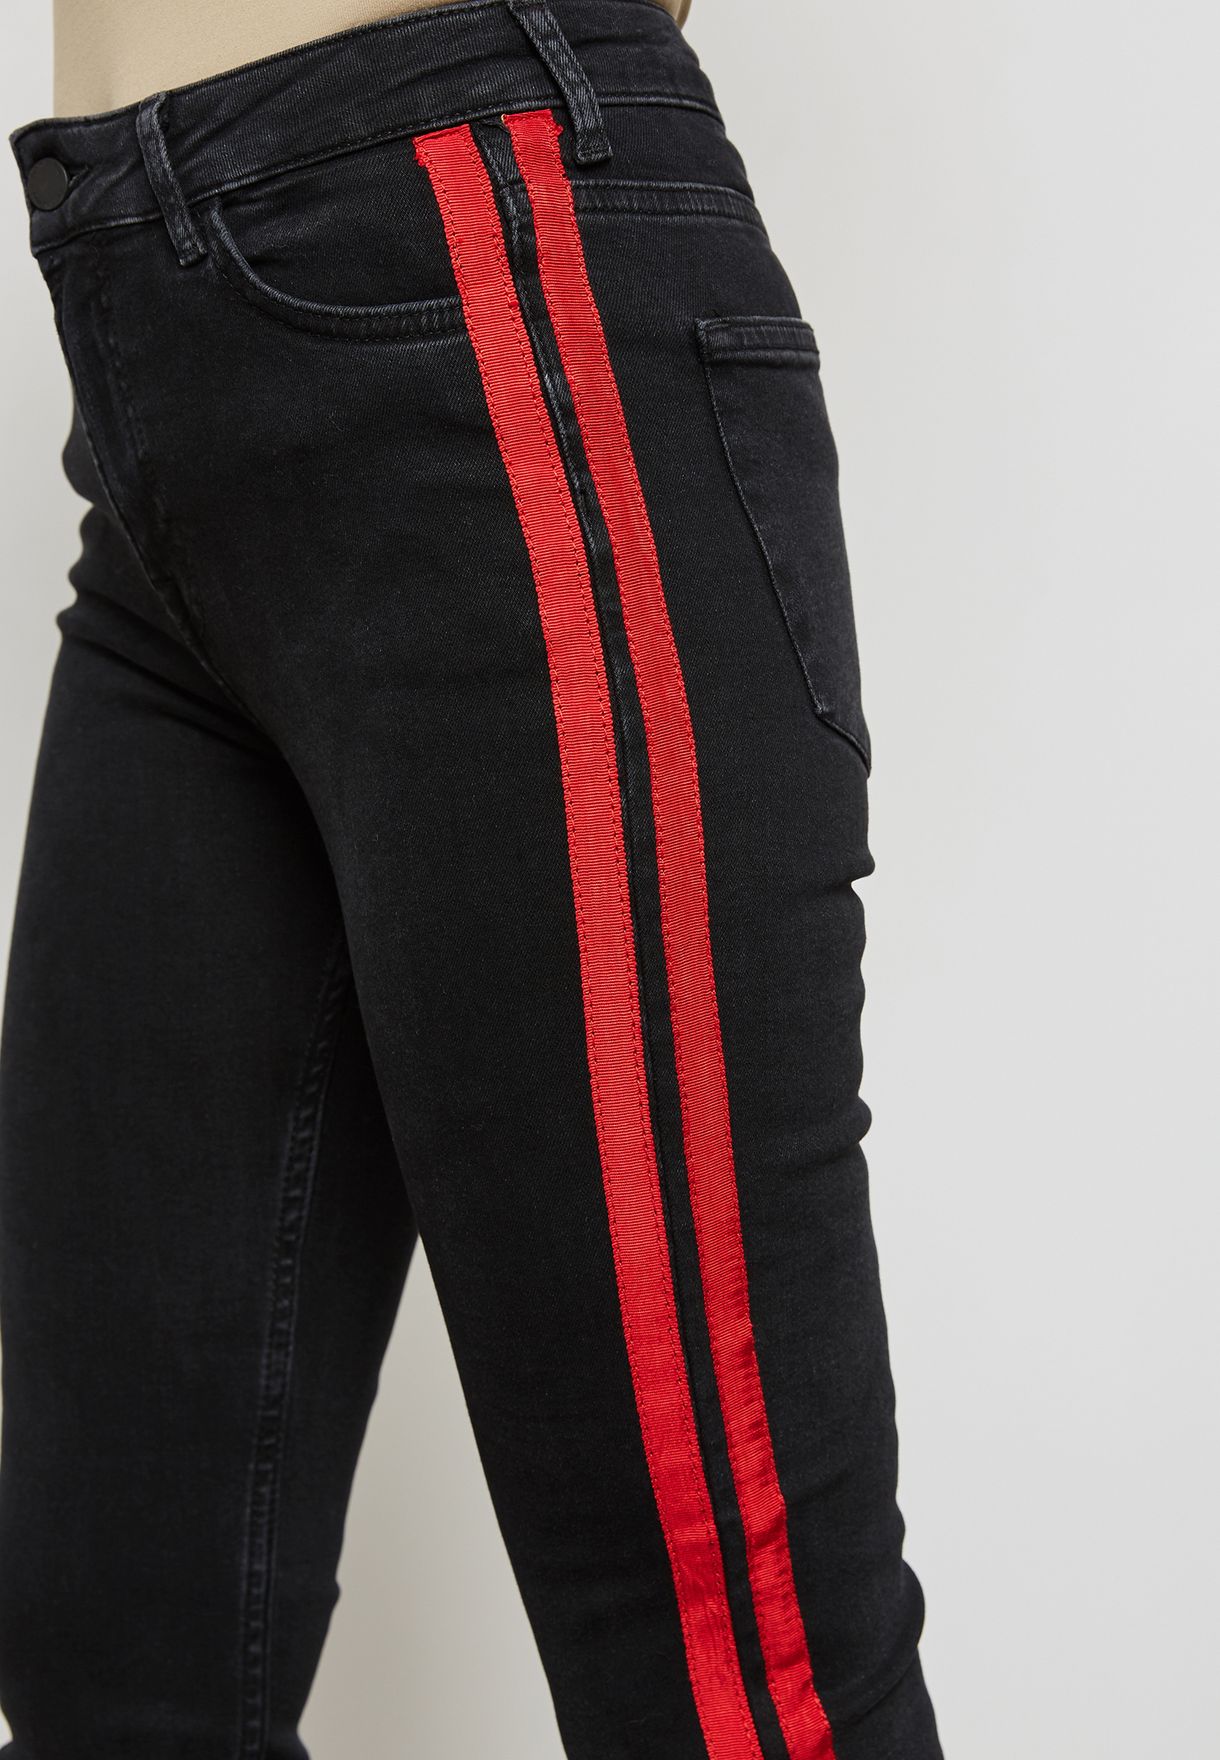 black jean with red stripe